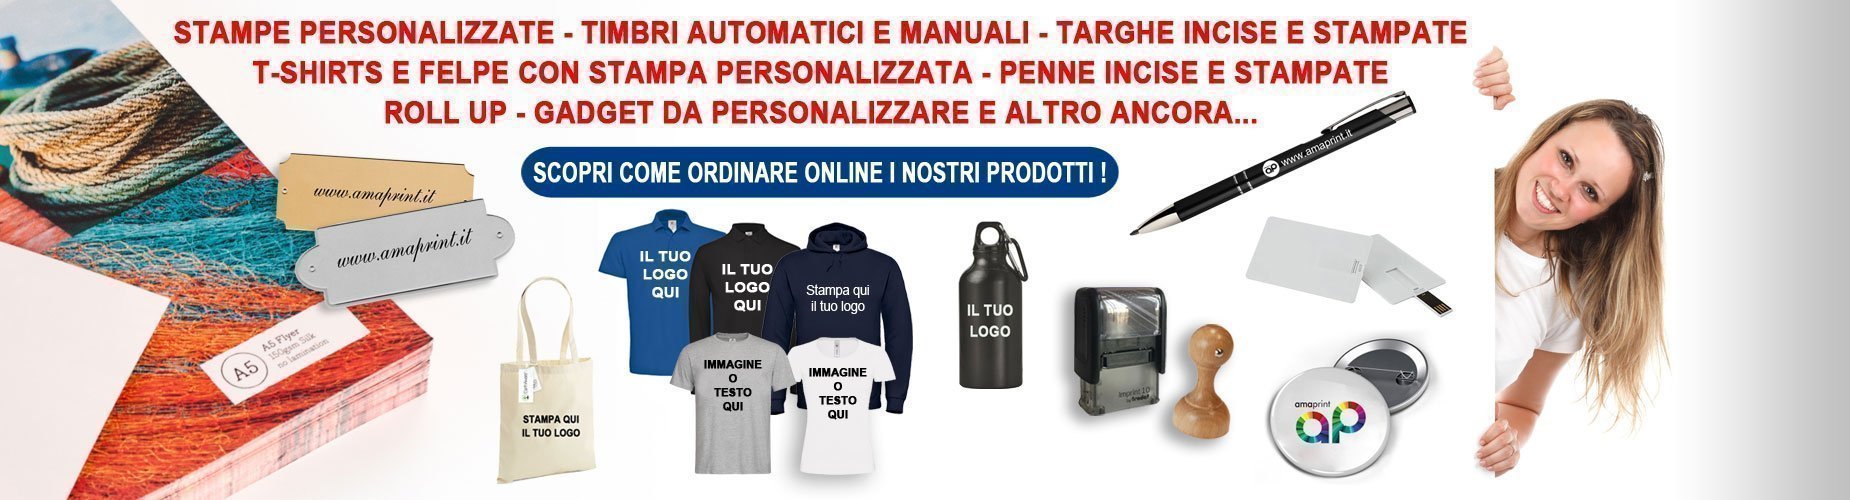 Stampe personalizzate online